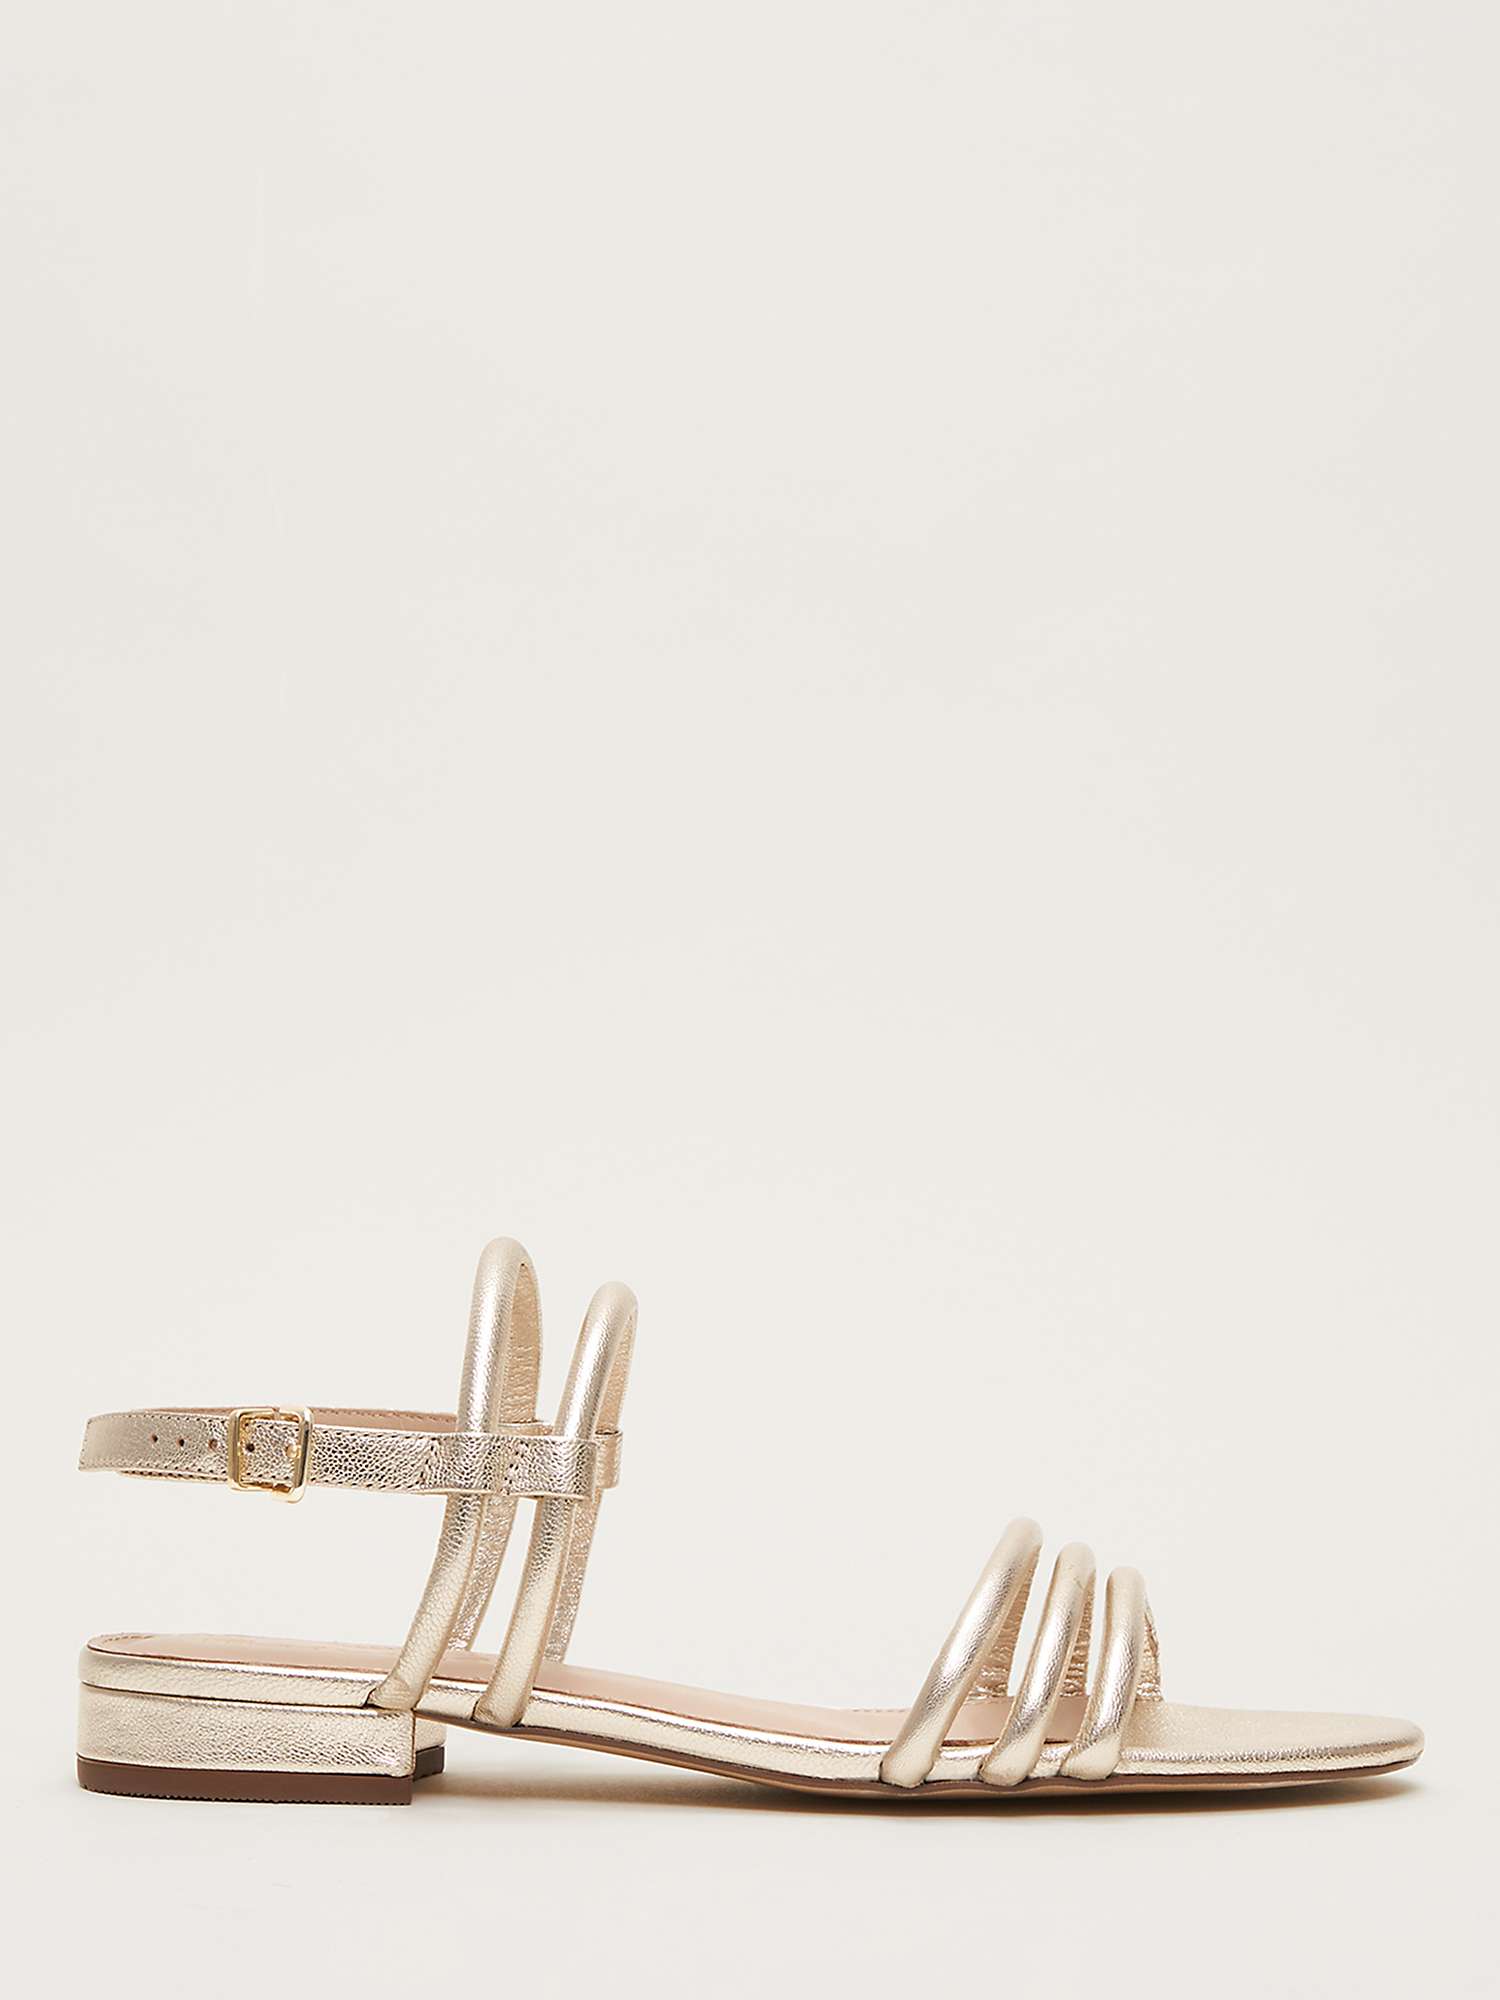 Buy Phase Eight Metallic Leather Sandals, Gold Online at johnlewis.com